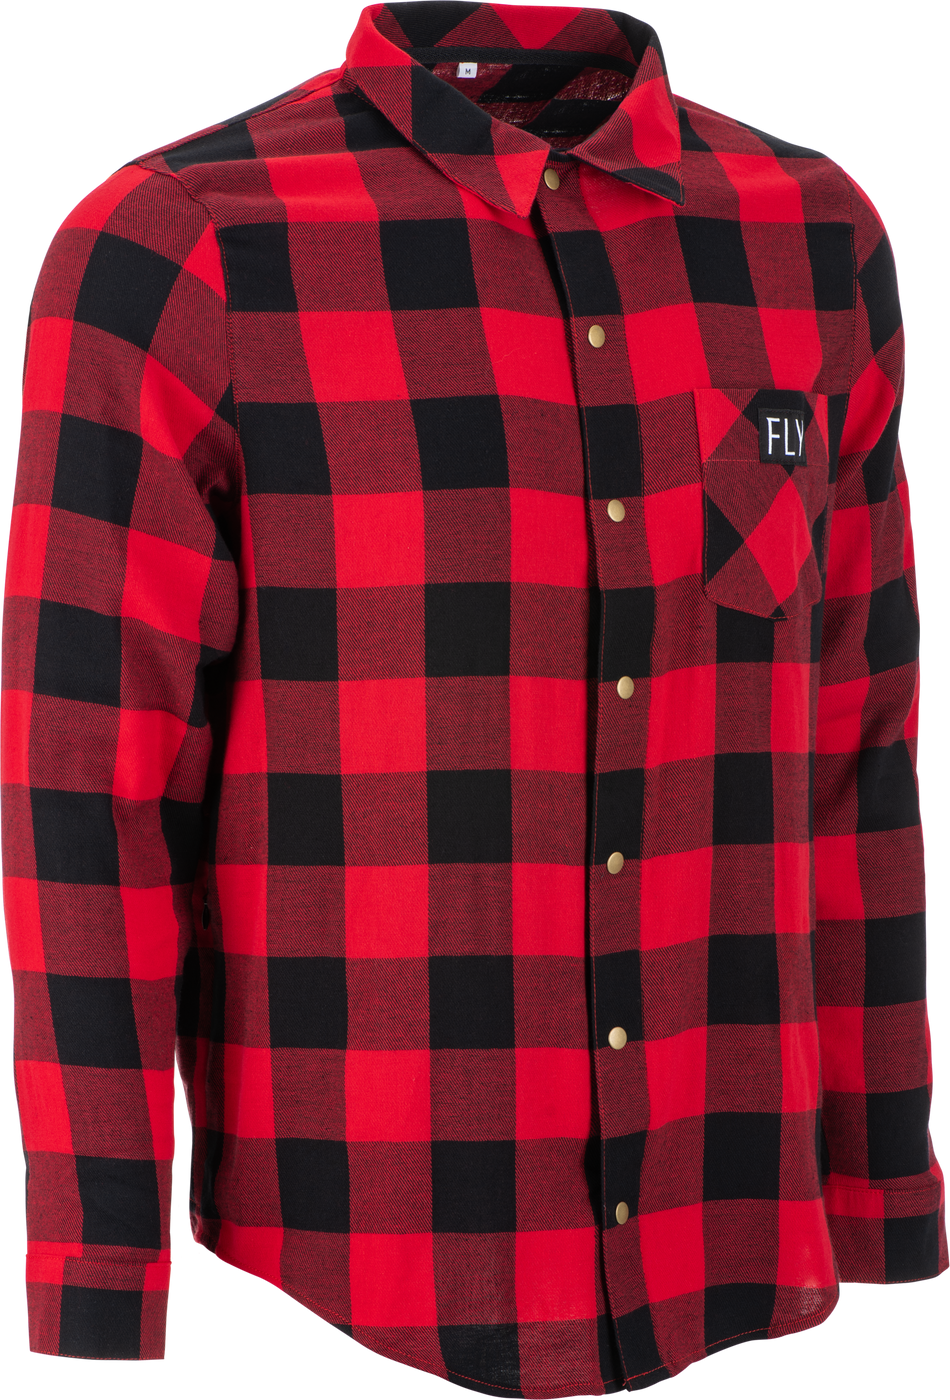 FLY RACING Fly Tek Flannel Red/Black Xl 354-6392X